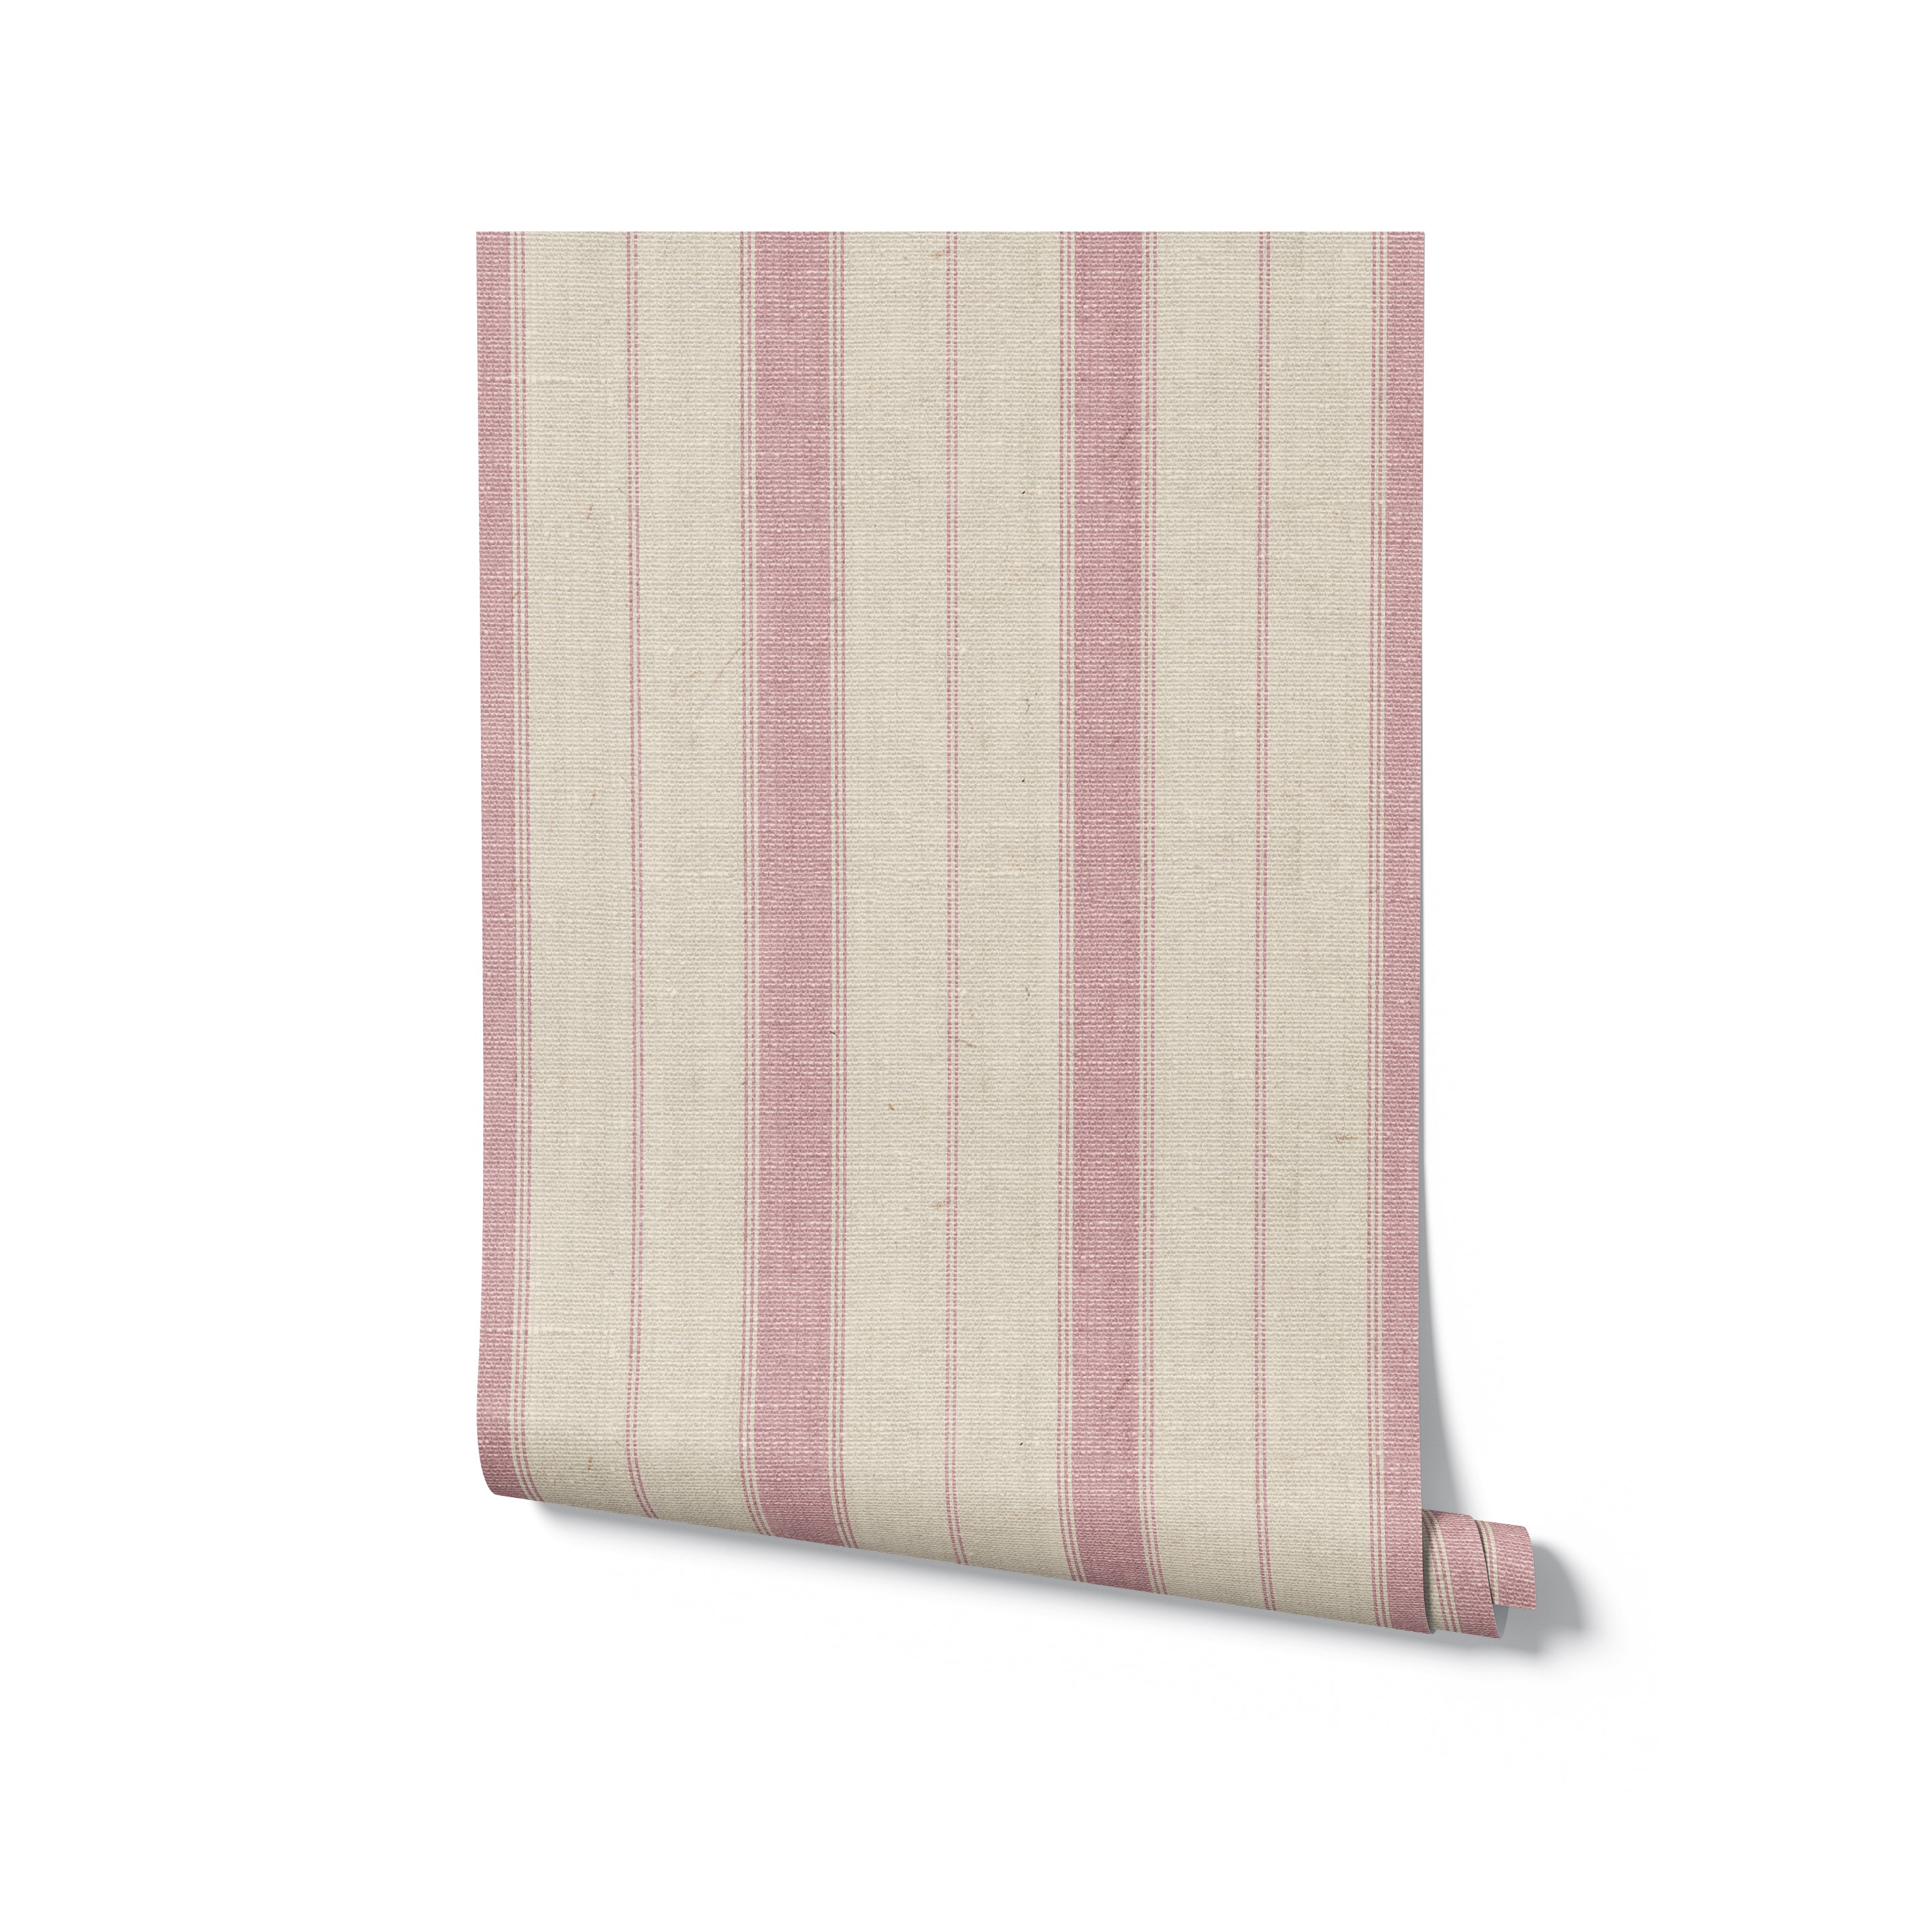 A roll of vertical-striped wallpaper in beige and muted pink, neatly rolled and ready for use in home decoration projects, showcasing the texture and color scheme of the fabric.